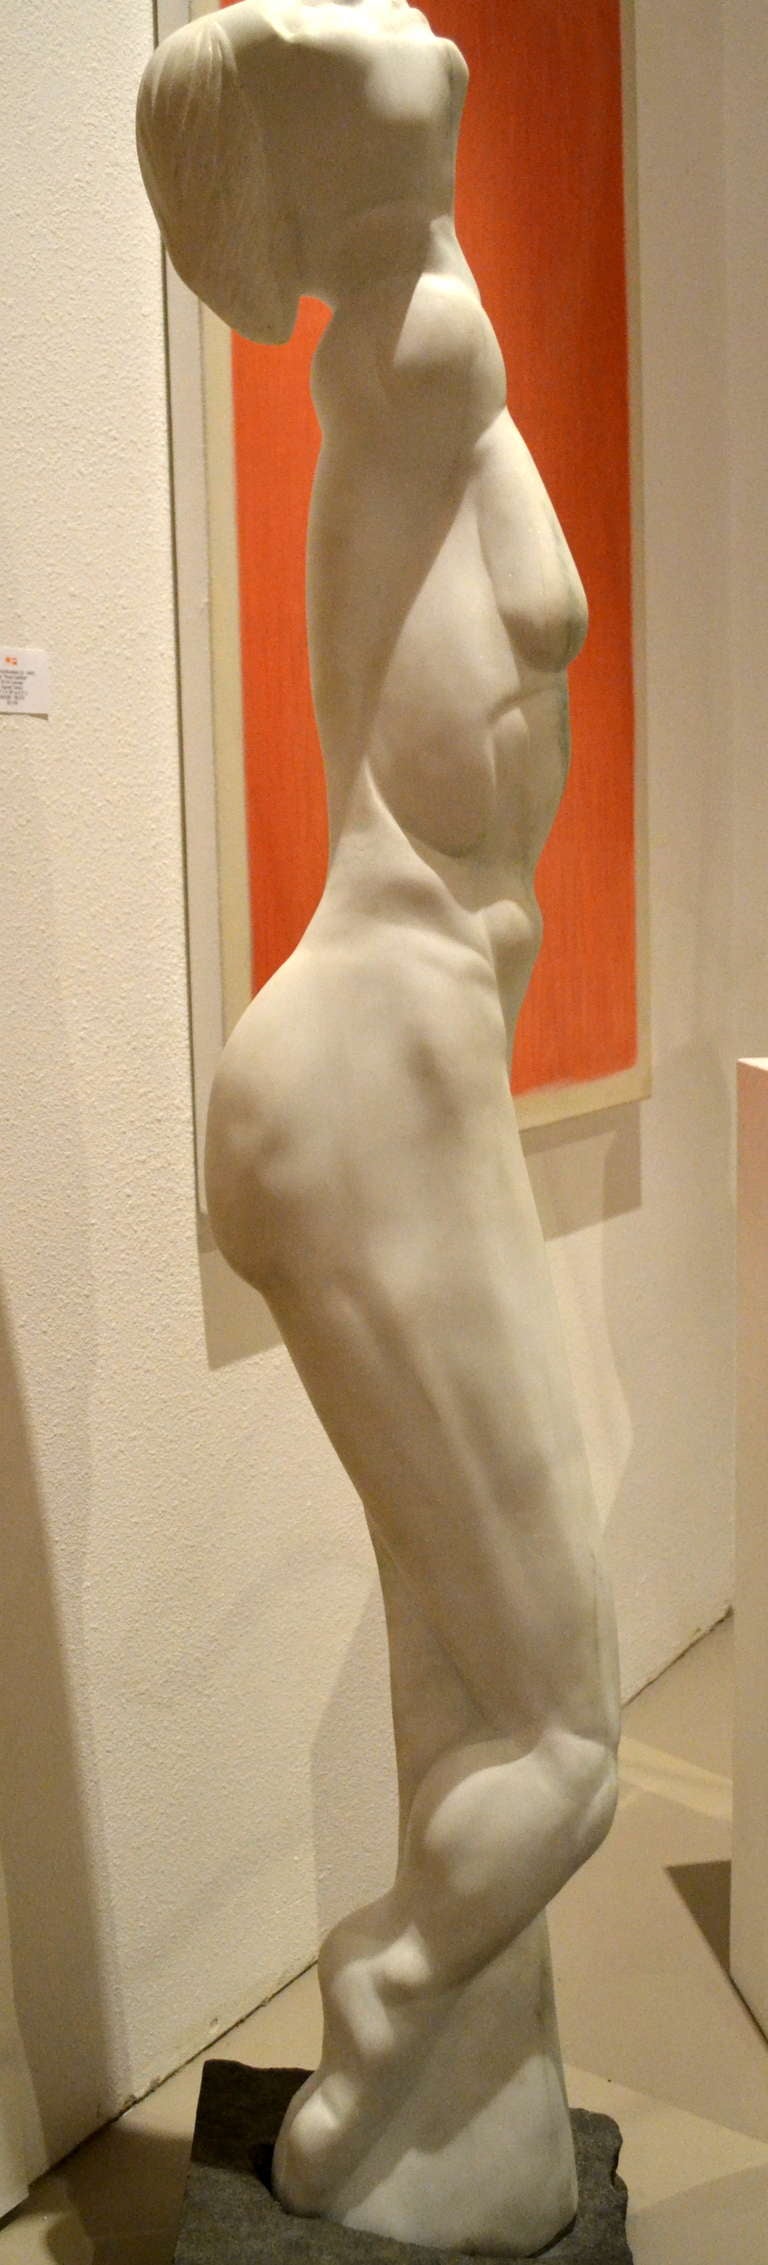 Hand-carved from one single piece of White Italian marble stands this lifesize abstract female figure. The sculpture stands effortlessly inside a separate block of granite which actually holds it in place.

Artist Scott Donadio (b.1961) should